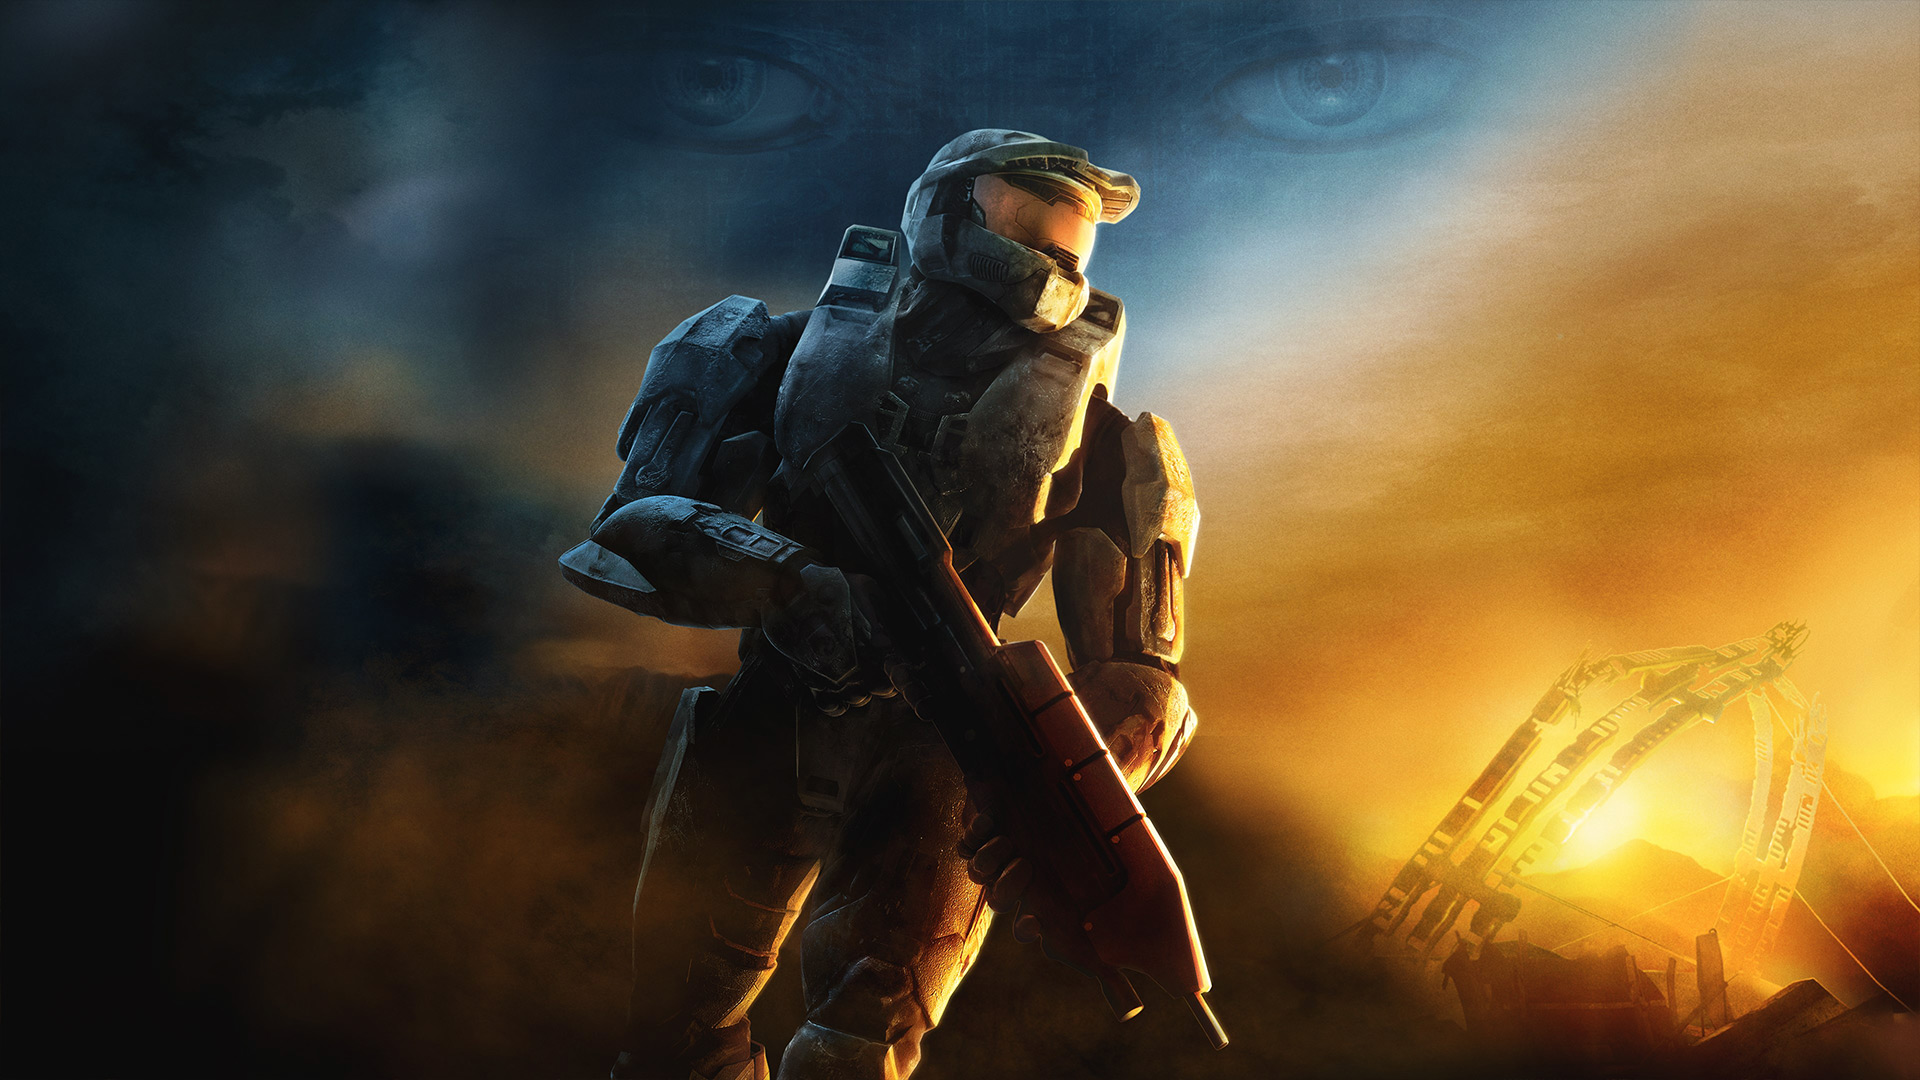 Halo games in order: Halo 3 art showing Master Chief looking into the distance with eyes blended into the horizon.